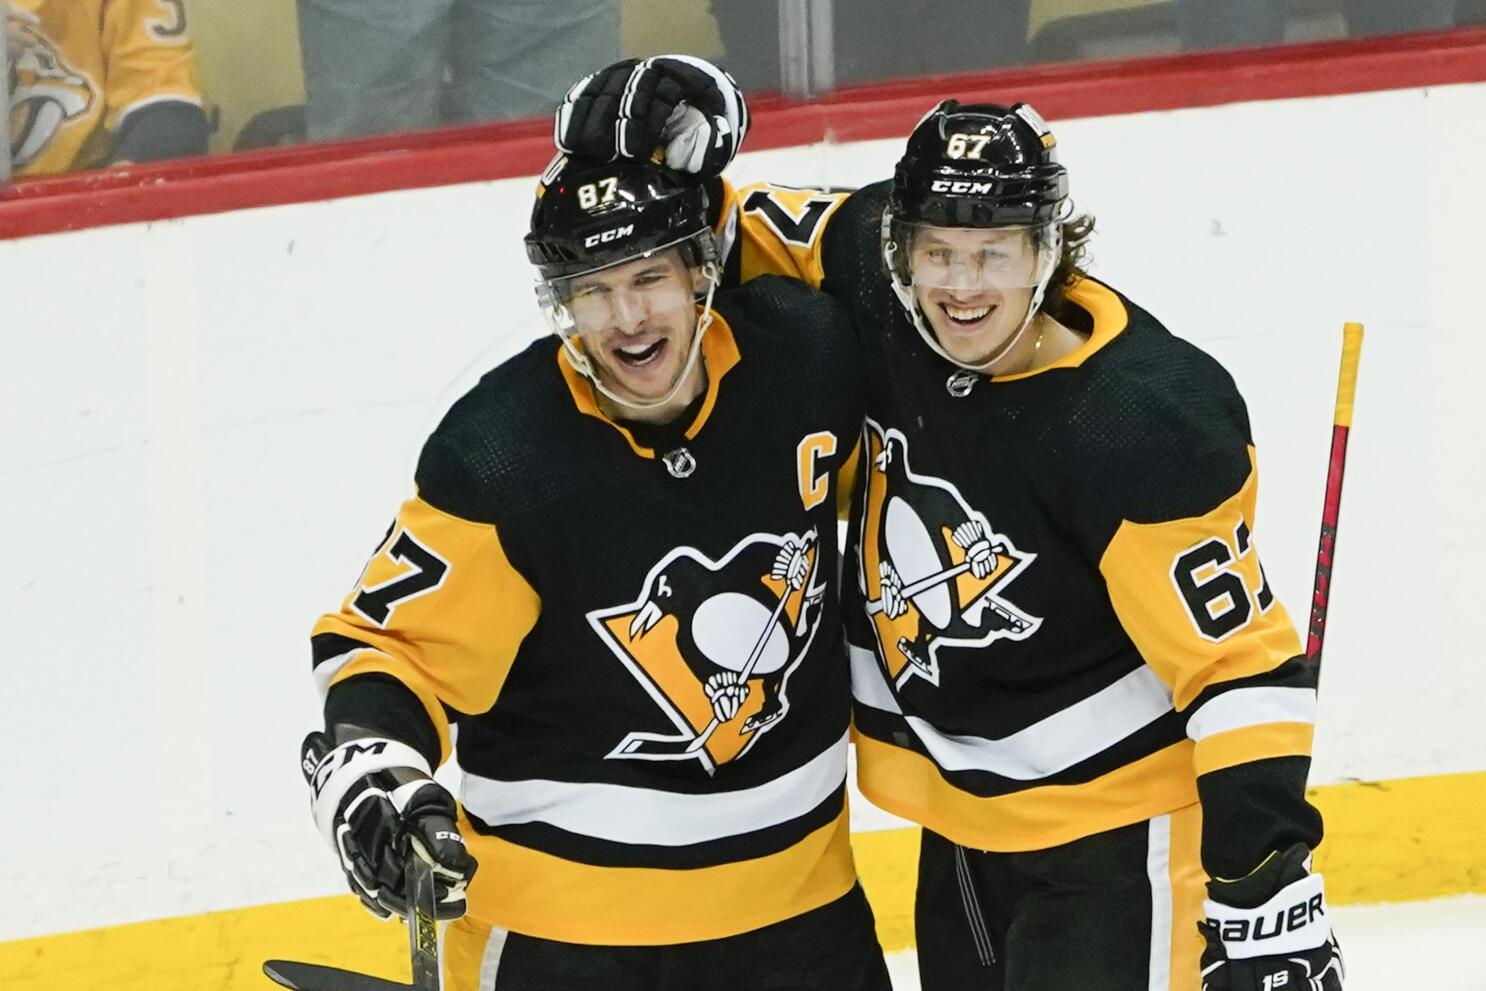 Crosby-Ovechkin rookie class one of NHL's best